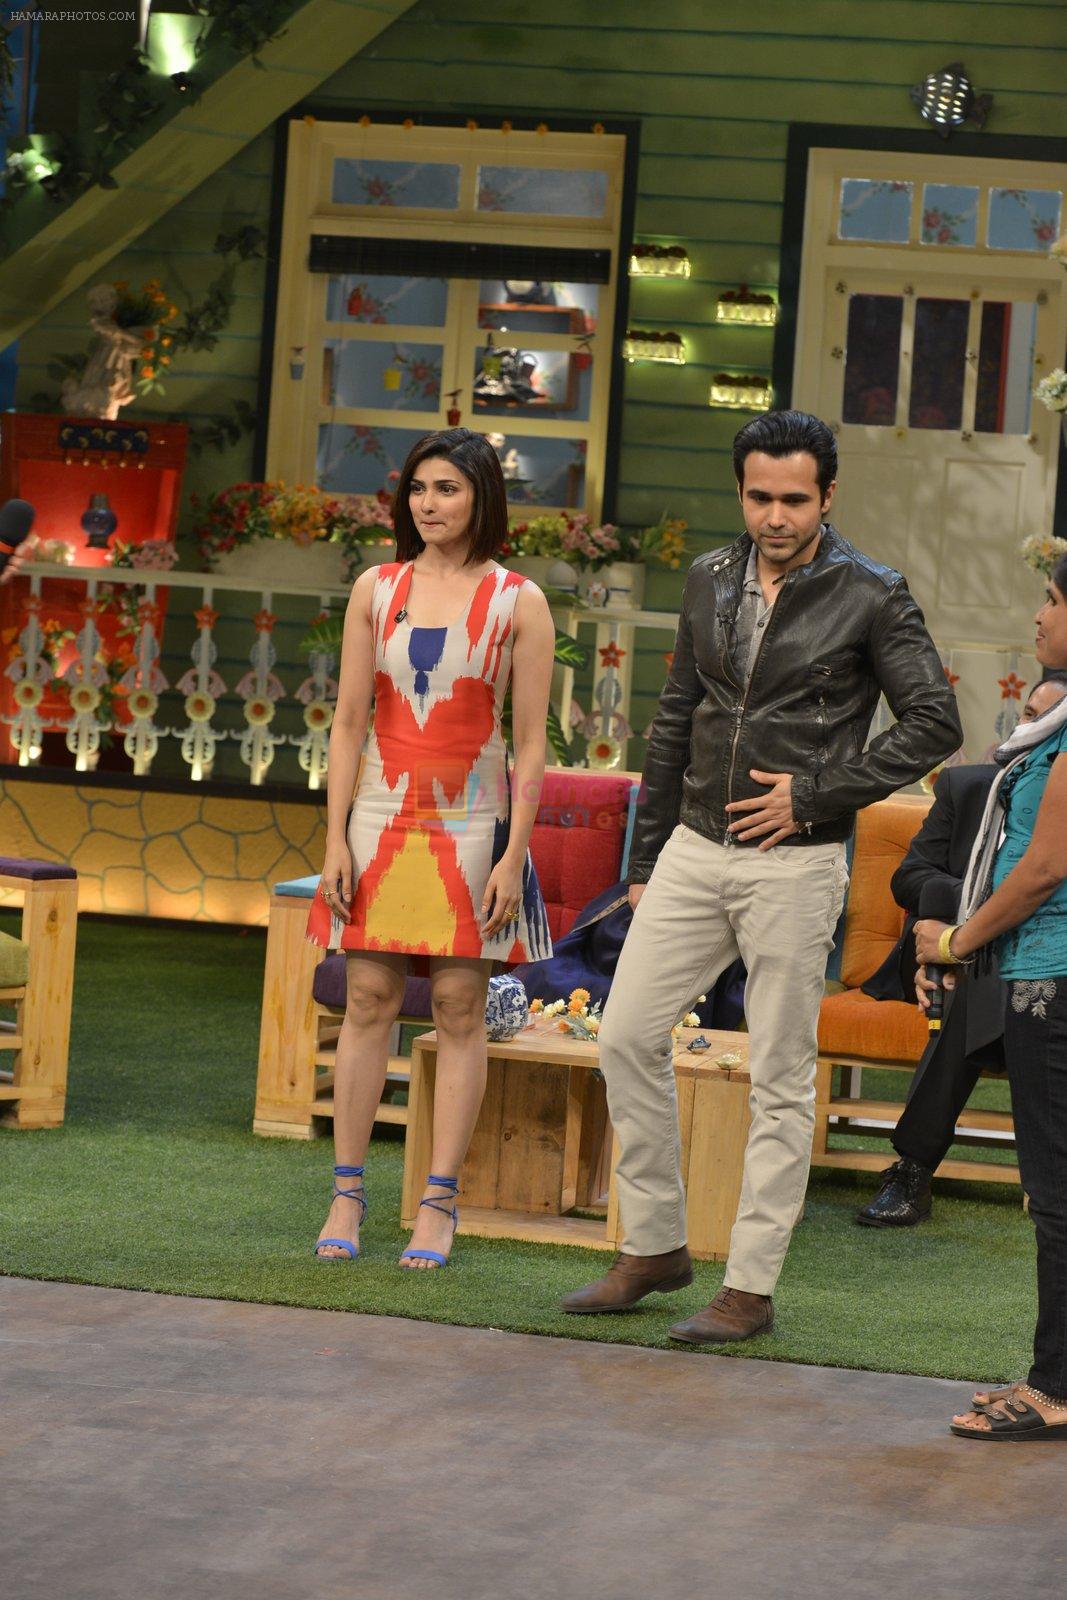 Emraan Hashmi, Prachi Desai at the promotion of Azhar on location of The Kapil Sharma Show on 22nd April 2016